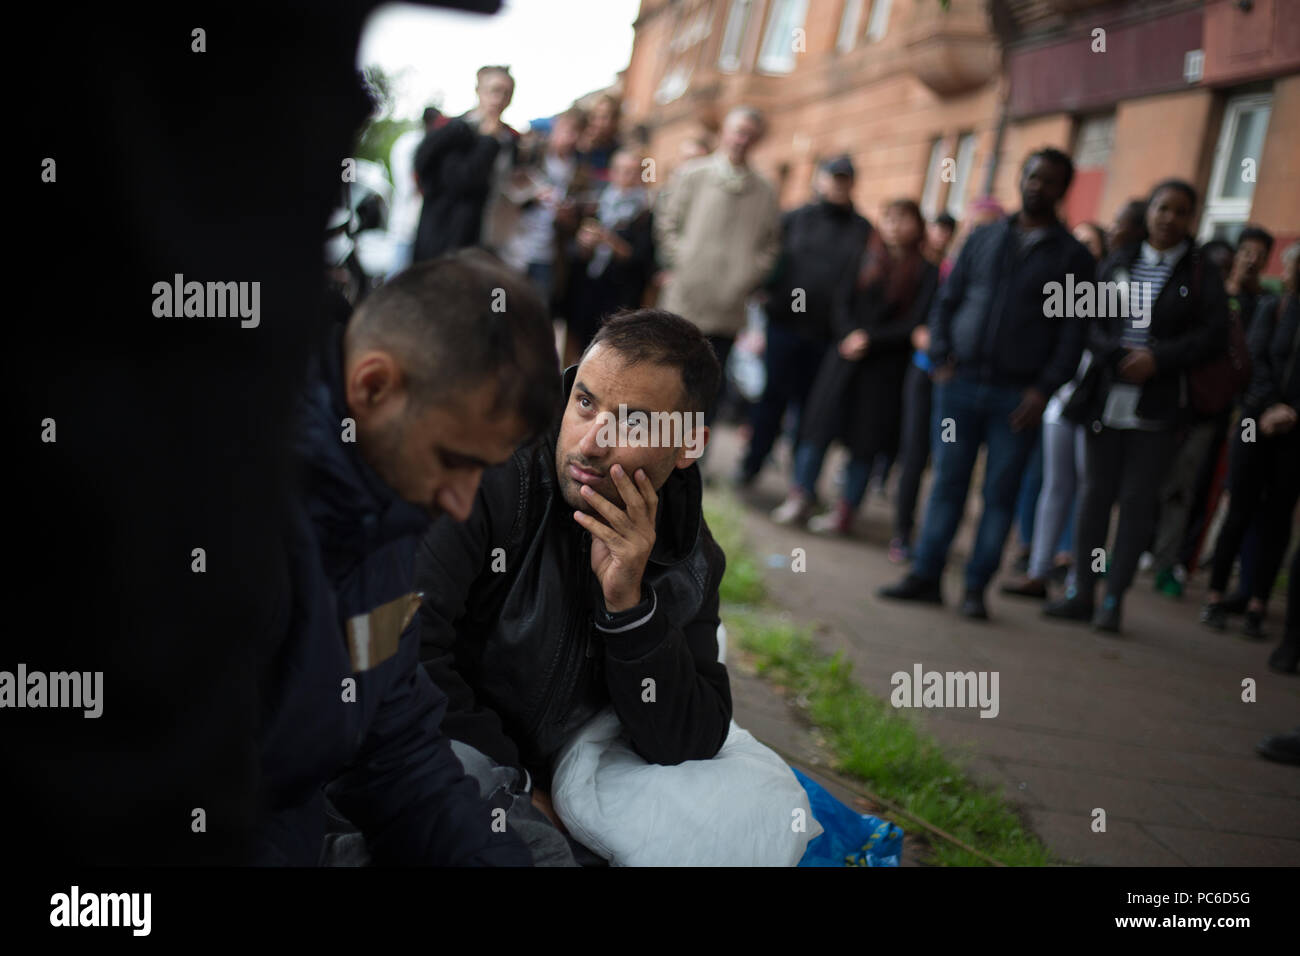 Glasgow, Scotland, on 1 August 2018. Rally in support of refugees facing eviction by private housing company SERCO. SERCO announced this week that they would begin to evict asylum seekers who have had their application for refugee status rejected. Up to 300 refugees are facing imminent eviction, including Afghan refugees Rahman Shah and Mirwais Ahmadzai (both pictured, bottom left) who have gone on hunger strike outside a Home Office building in Glasgow. Image credit: Jeremy Sutton-Hibbert/ Alamy News Stock Photo